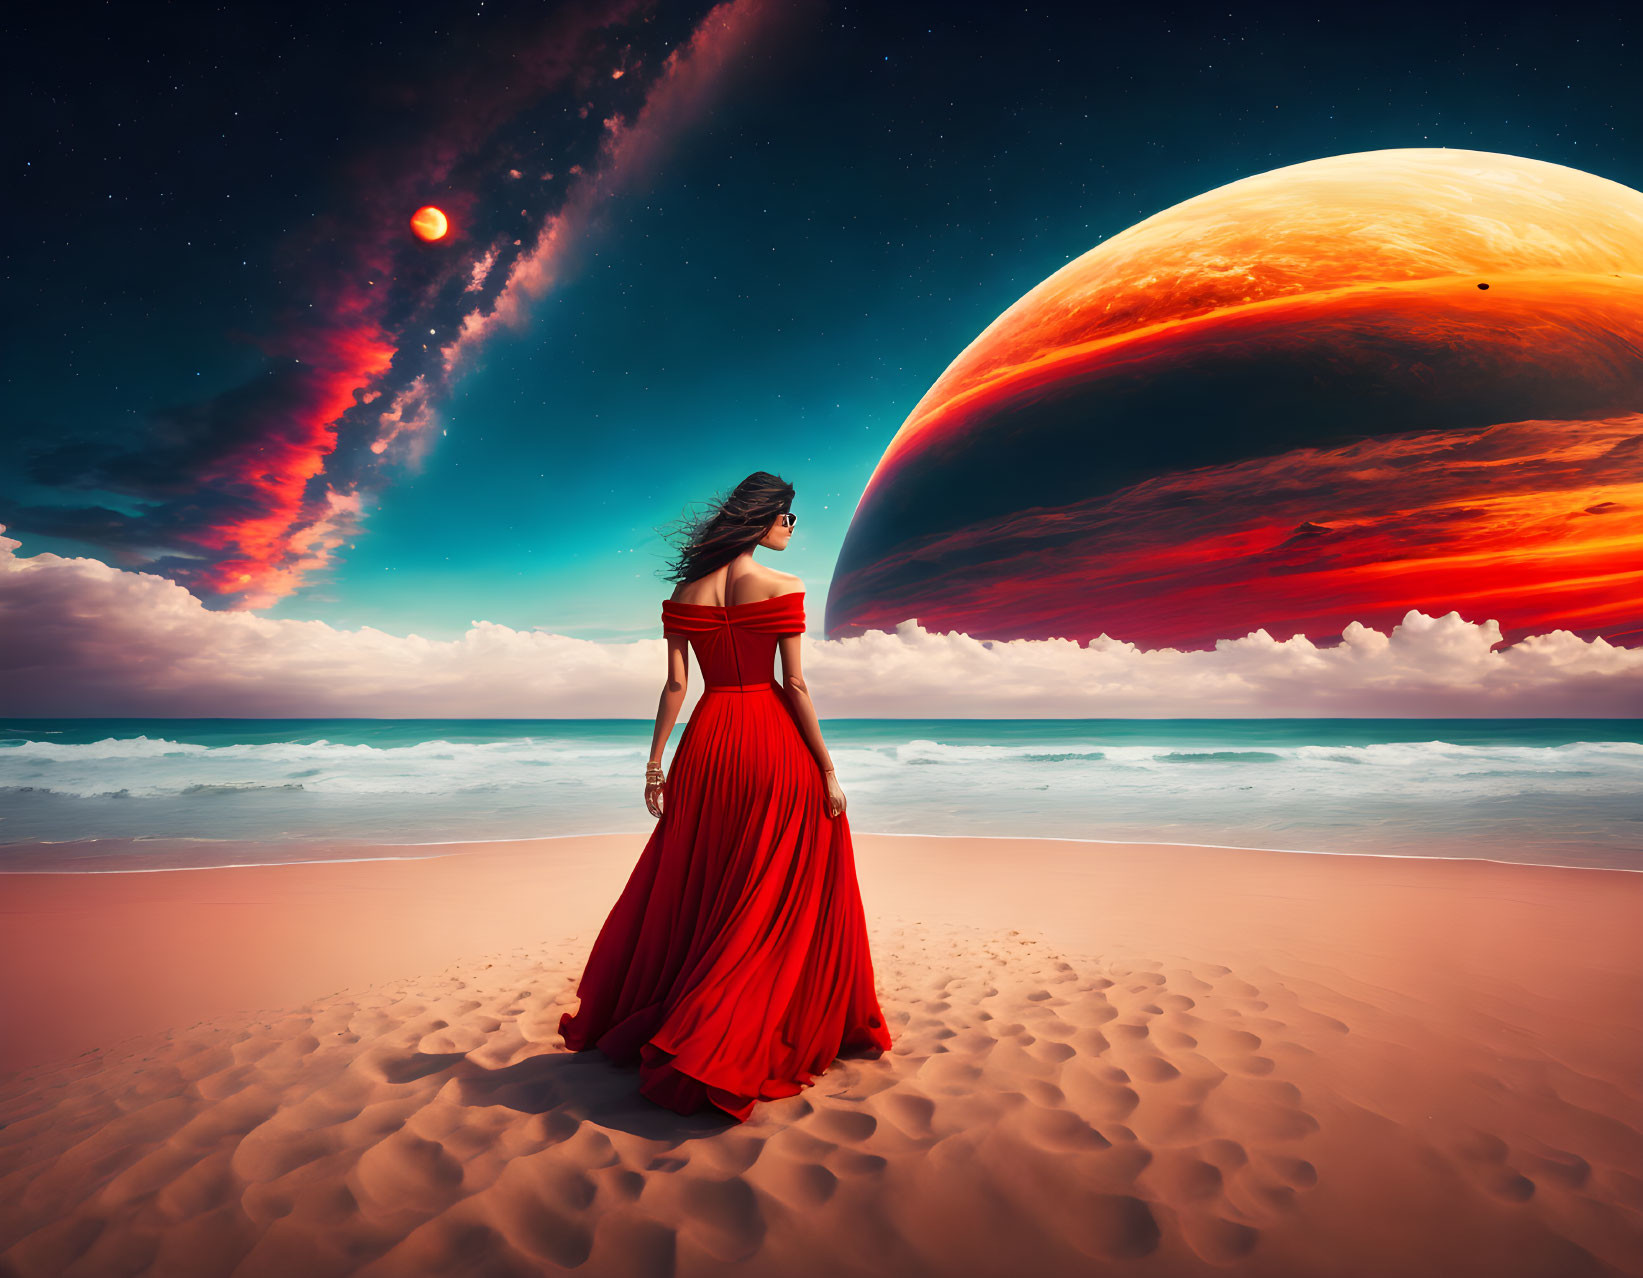 Woman in Red Dress on Beach Gazes at Surreal Sky